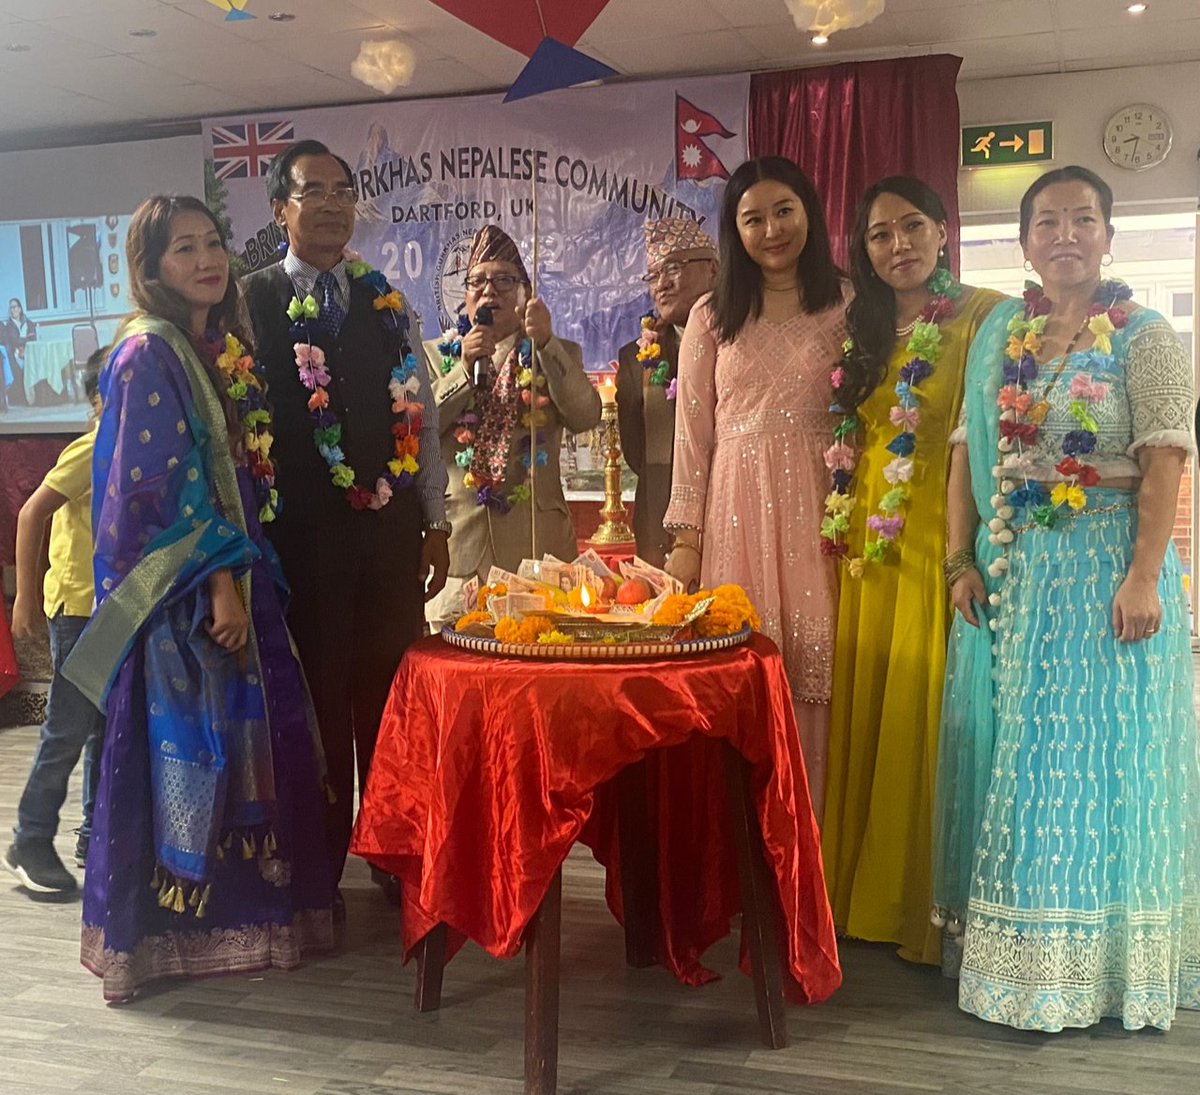 It was a great honour to attend the British Gurkha Nepalese Community, Dartford Annual Cultural event at the Glentworth Club earlier this month. I was made so welcome and was amazed at the beautiful colours of the traditional clothing. The community spirit was excellent.